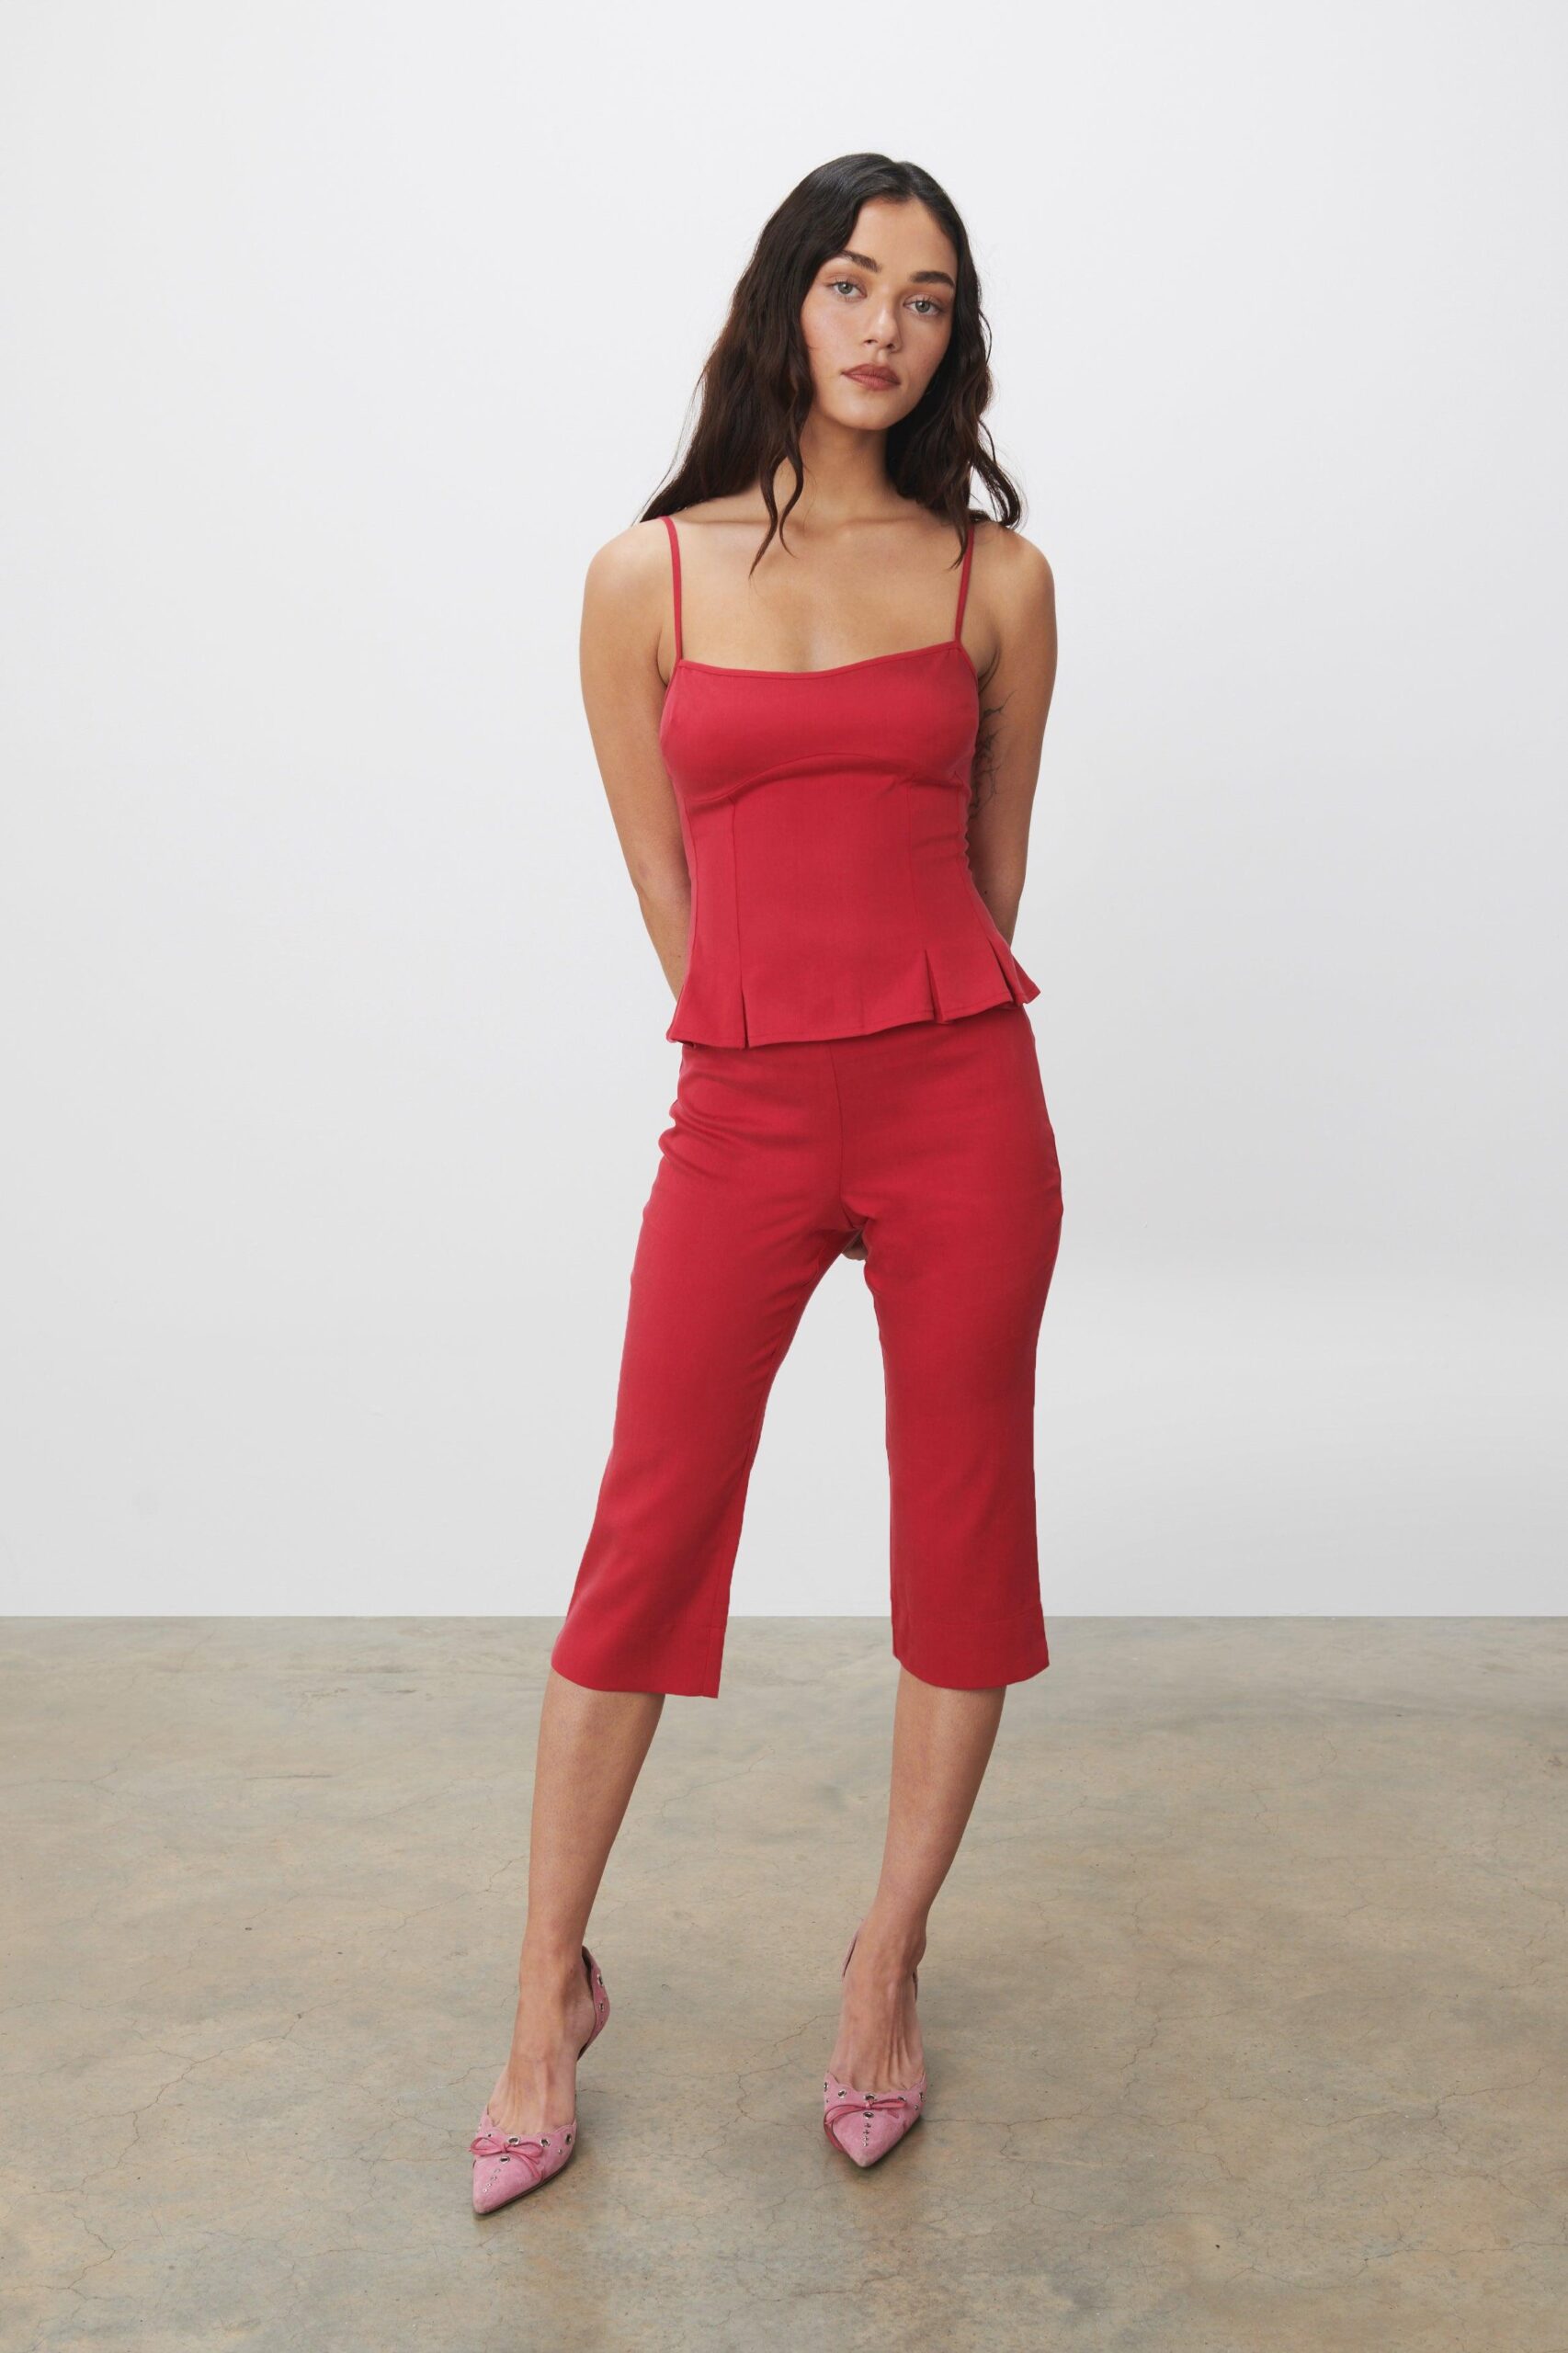 Peachy Den red mid rise slim fit capris, with small side vents at the hem. Created from a woven fabric that has a little stretch.